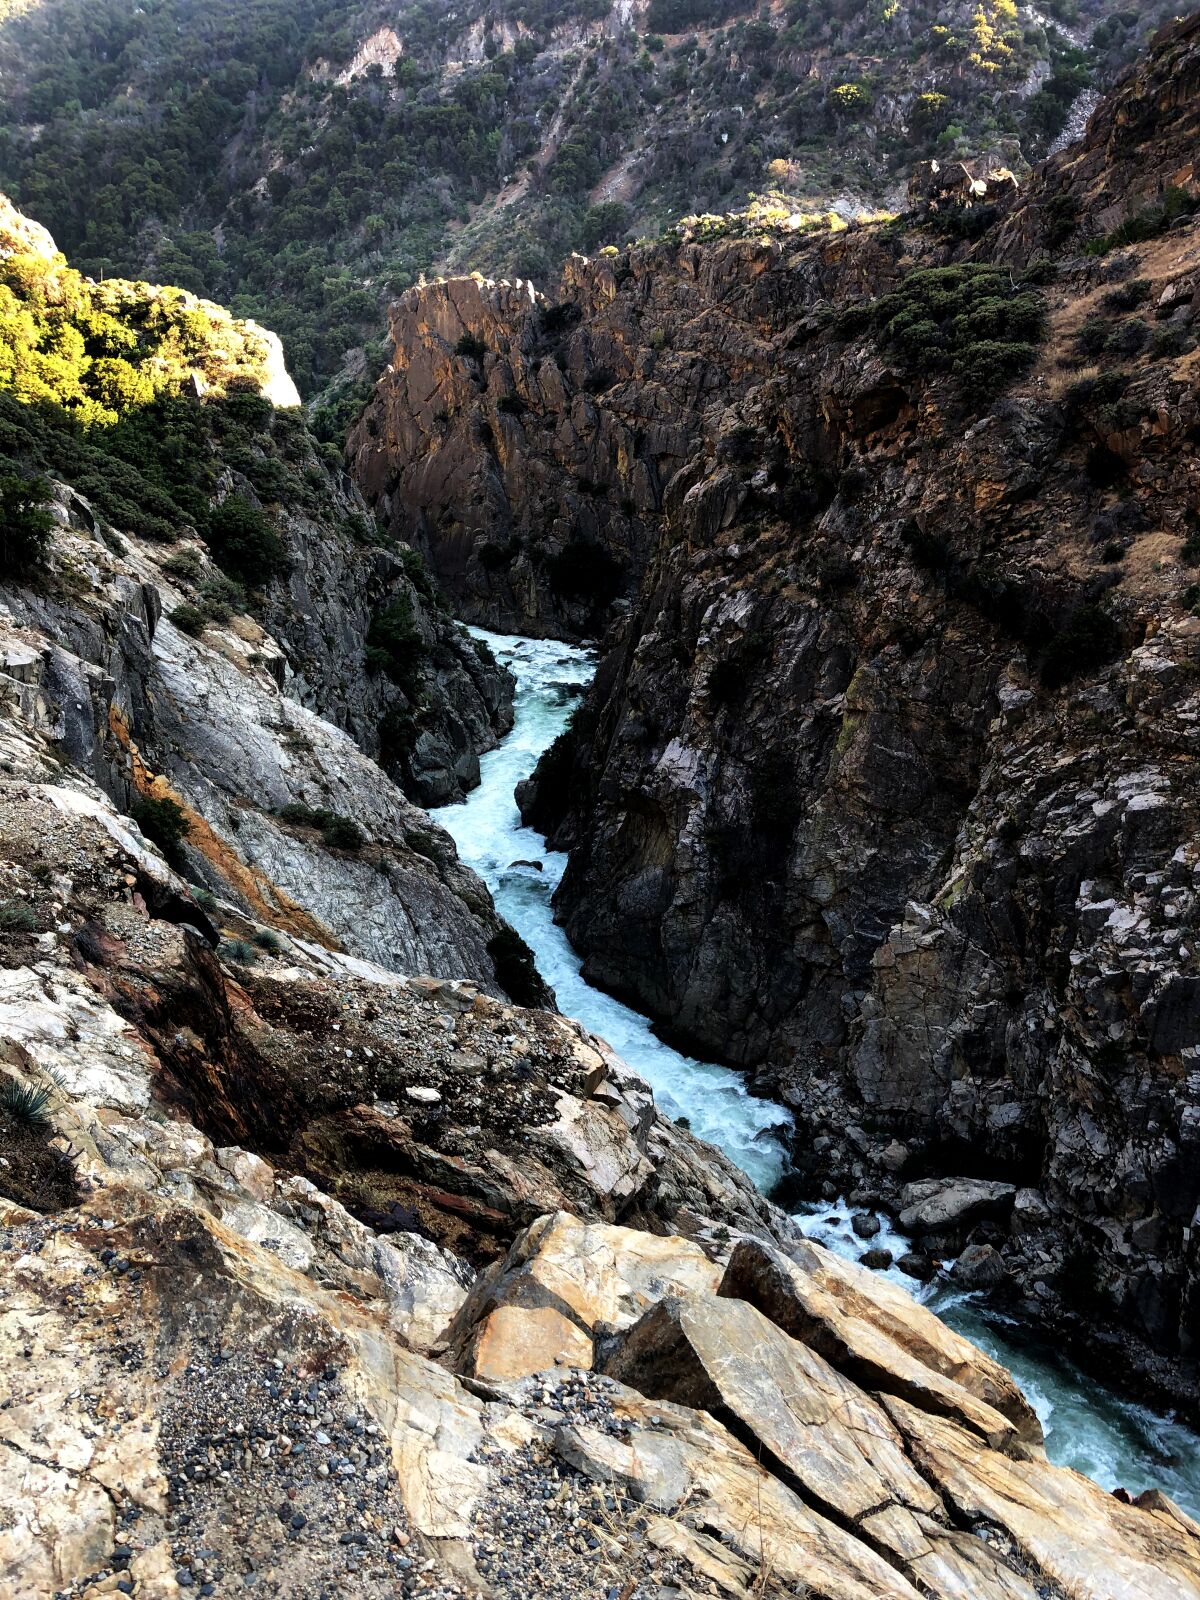 The Kings River, which runs through Kings Canyon National Park, has carved a canyon whose rim offers spectacular views.